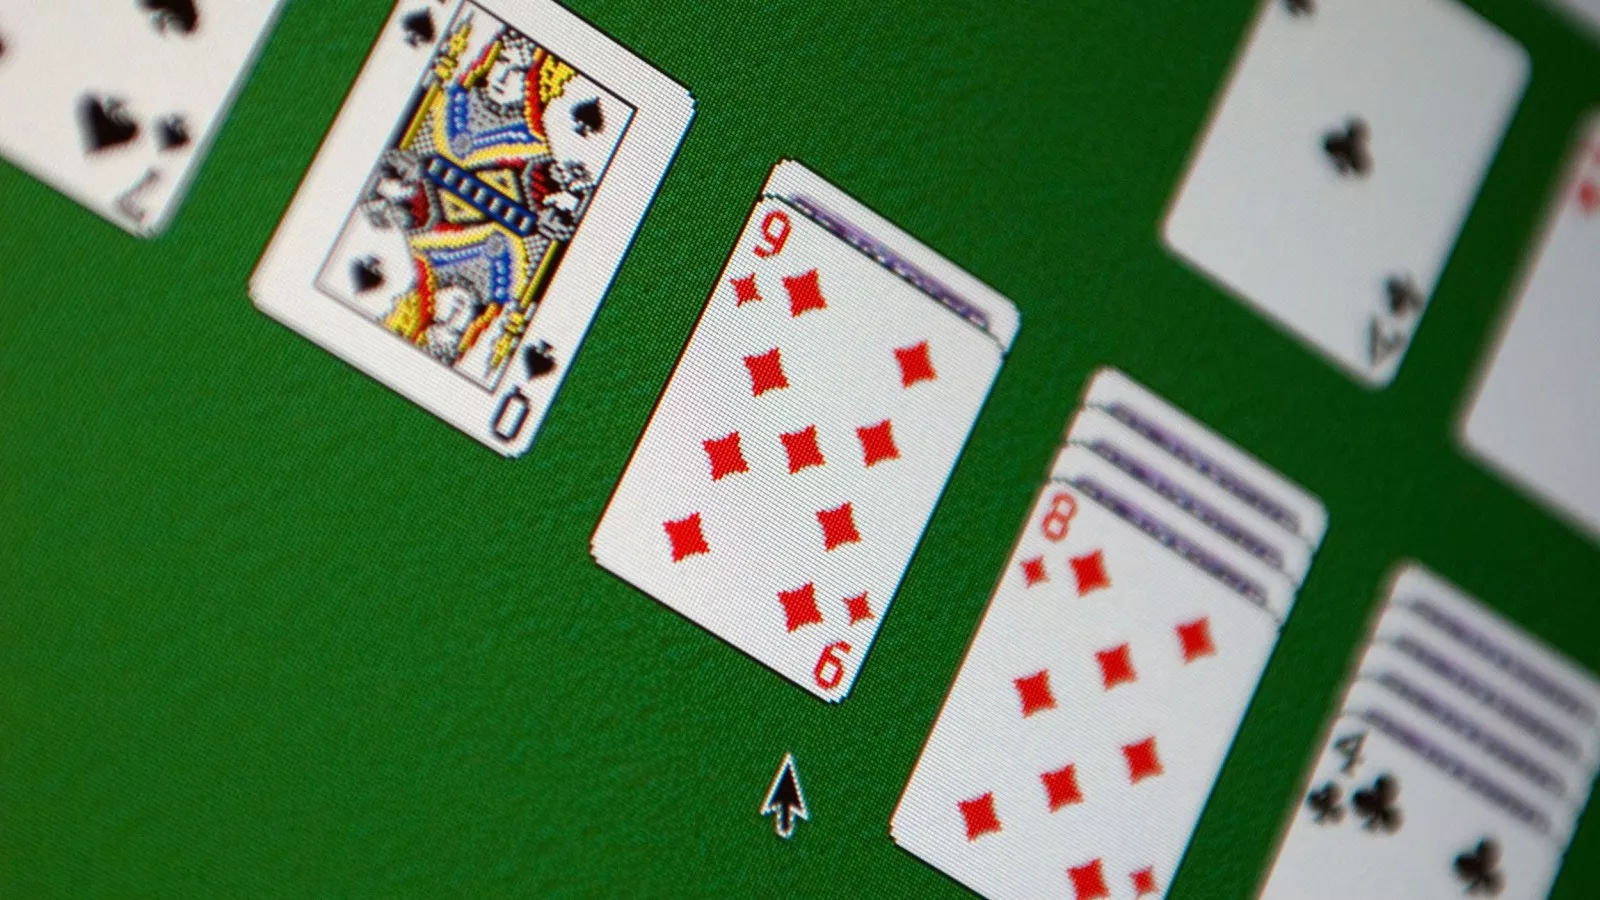 Get a free week of Microsoft Solitaire Collection Premium Edition on  Windows 10